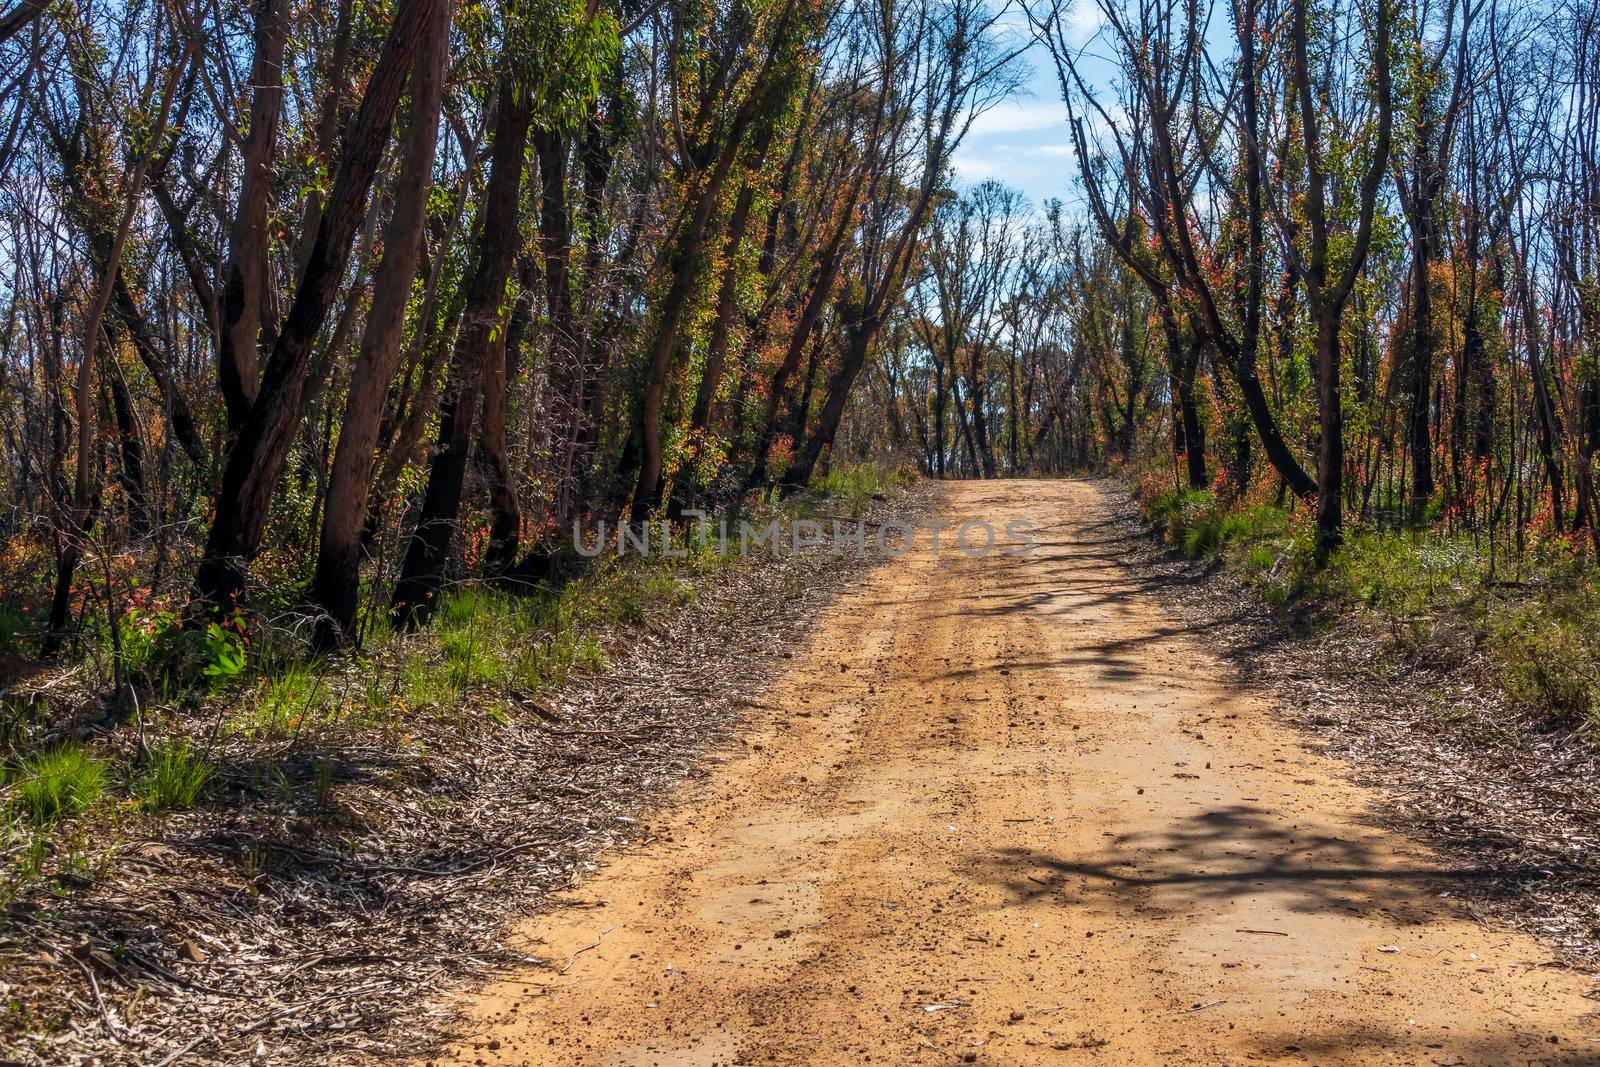 A dirt track running through forest regeneration after severe bushfires in The Blue Mountains in regional New South Wales in Australia